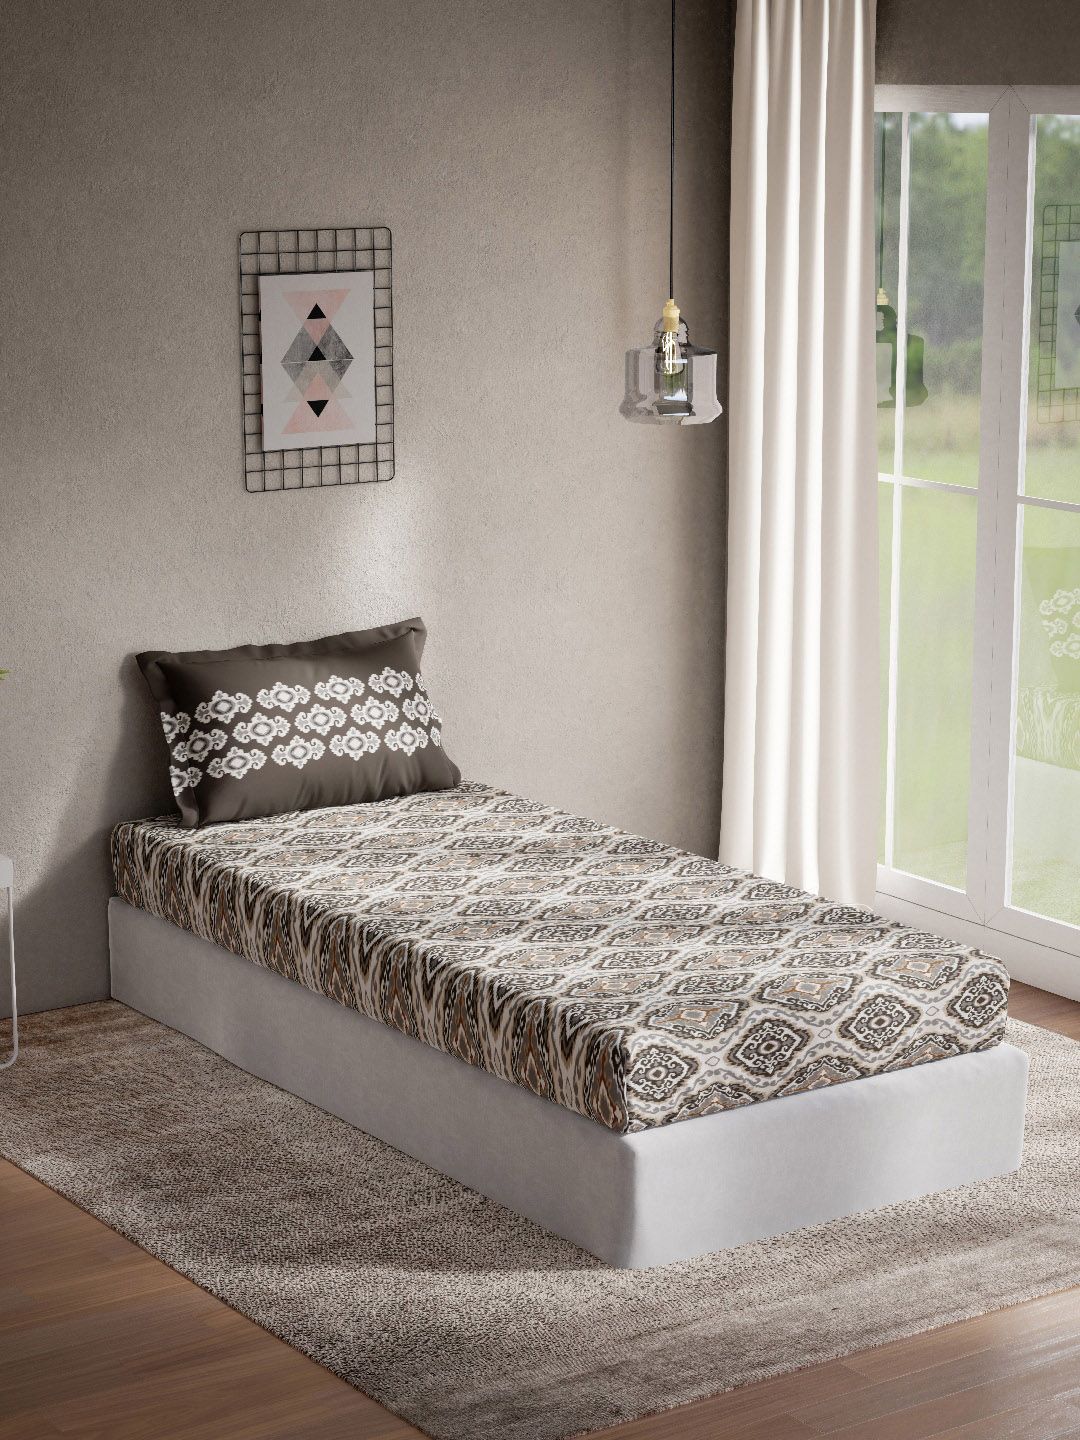 DDecor Grey & White Printed Cotton 144 TC Single Bedsheet with 1 Pillow Cover Price in India